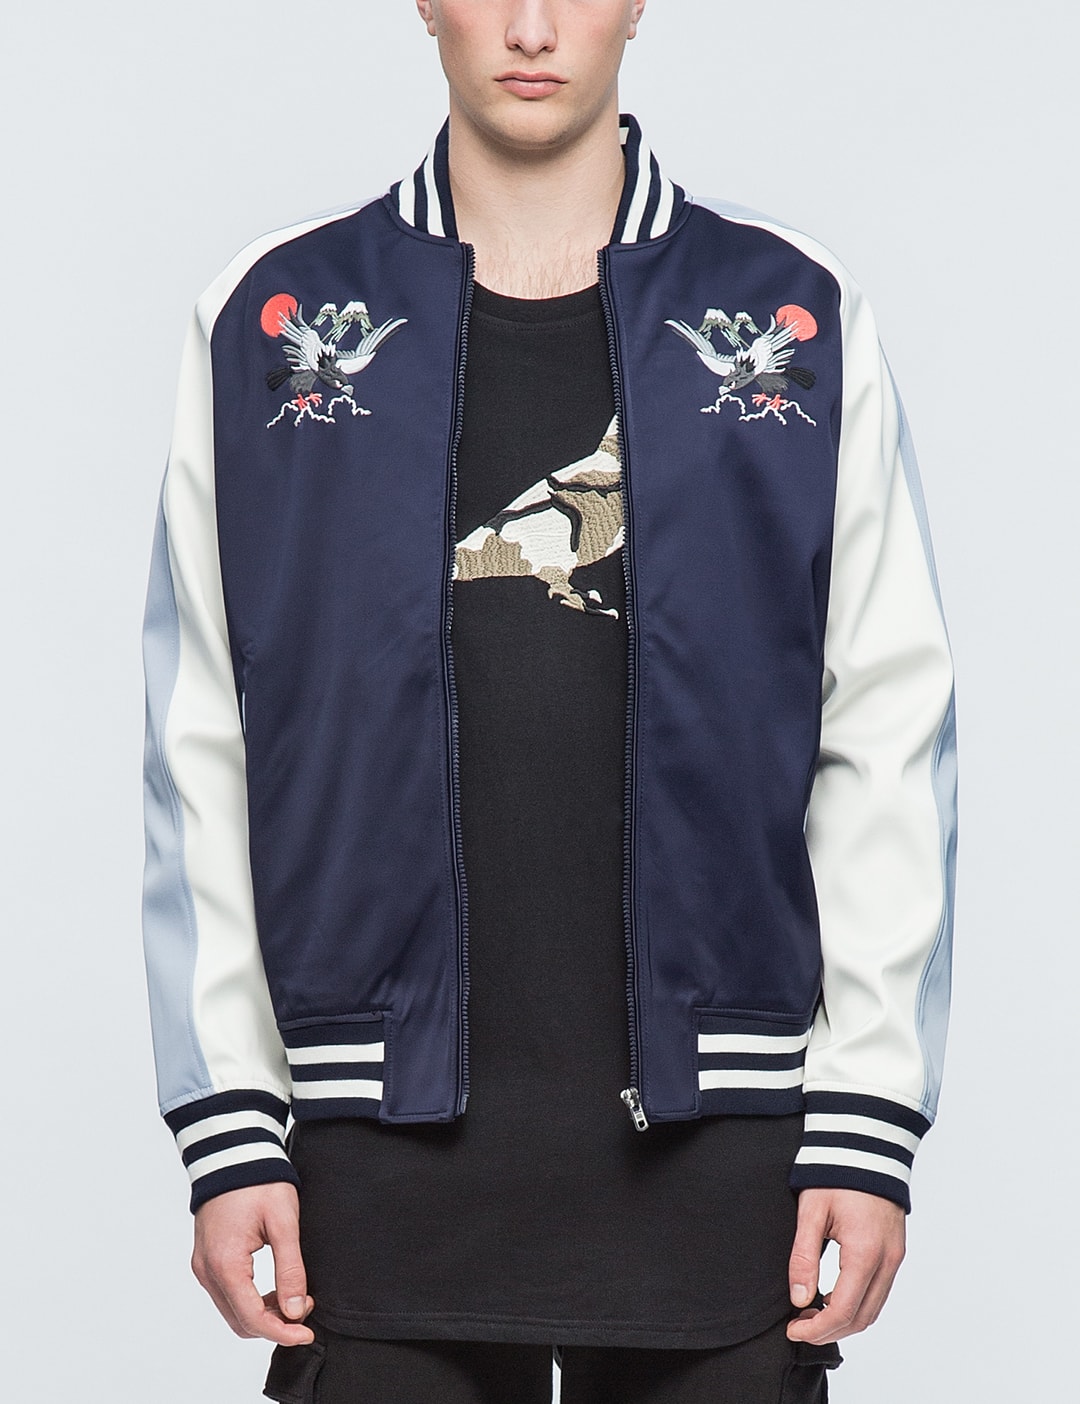 Staple - Pigeon Souvenir Jacket | HBX - Globally Curated Fashion and ...